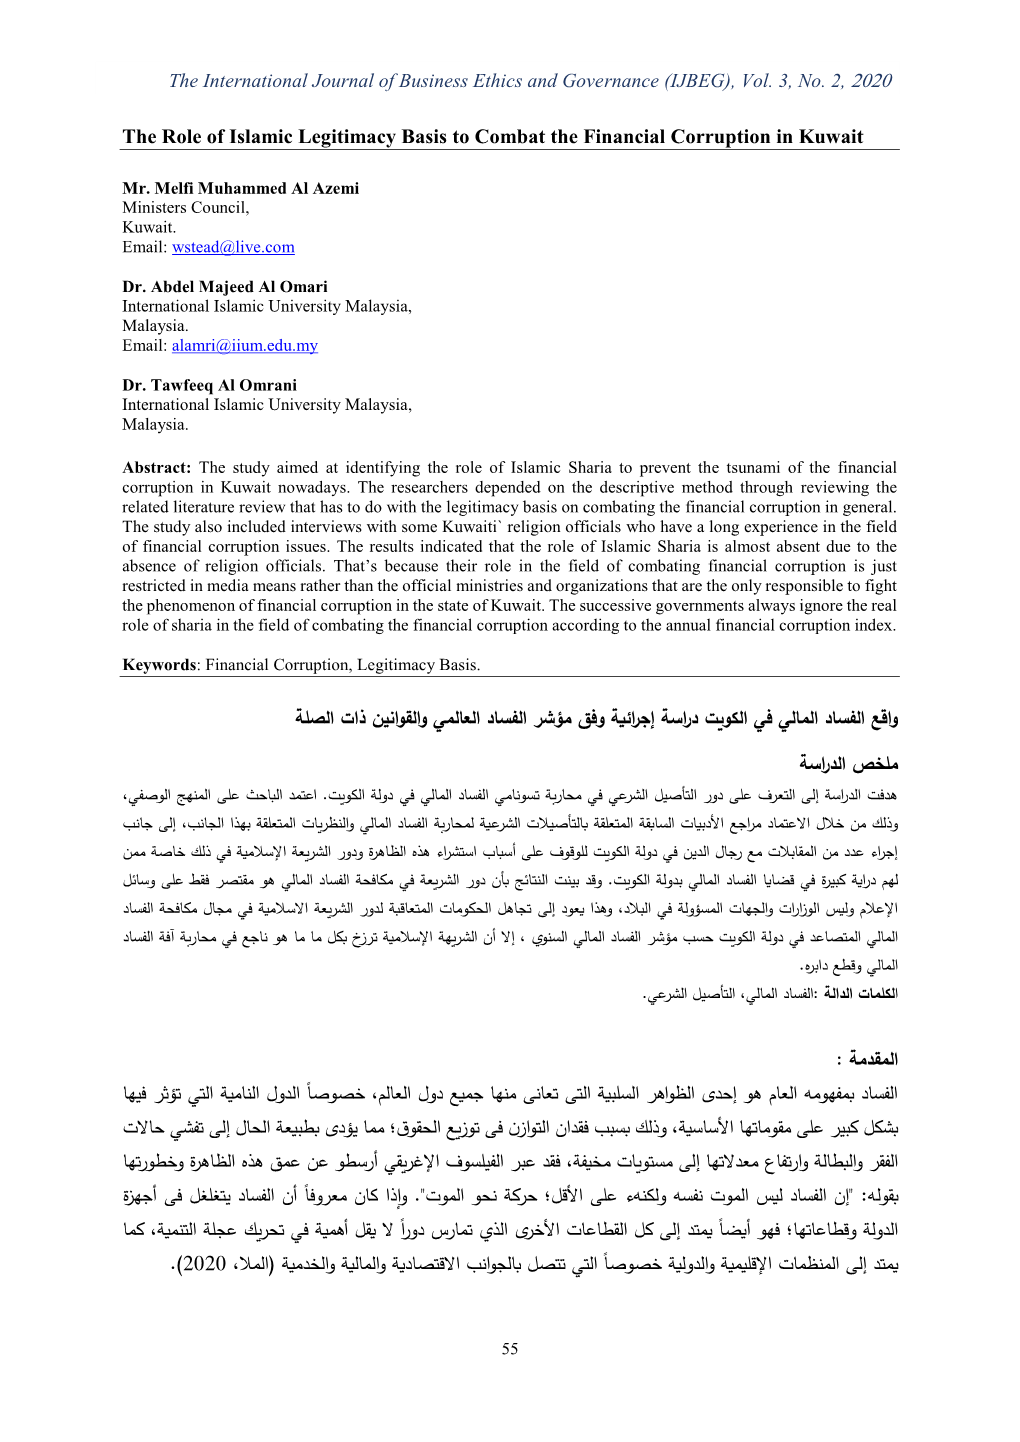 The Role of Islamic Legitimacy Basis to Combat the Financial Corruption in Kuwait